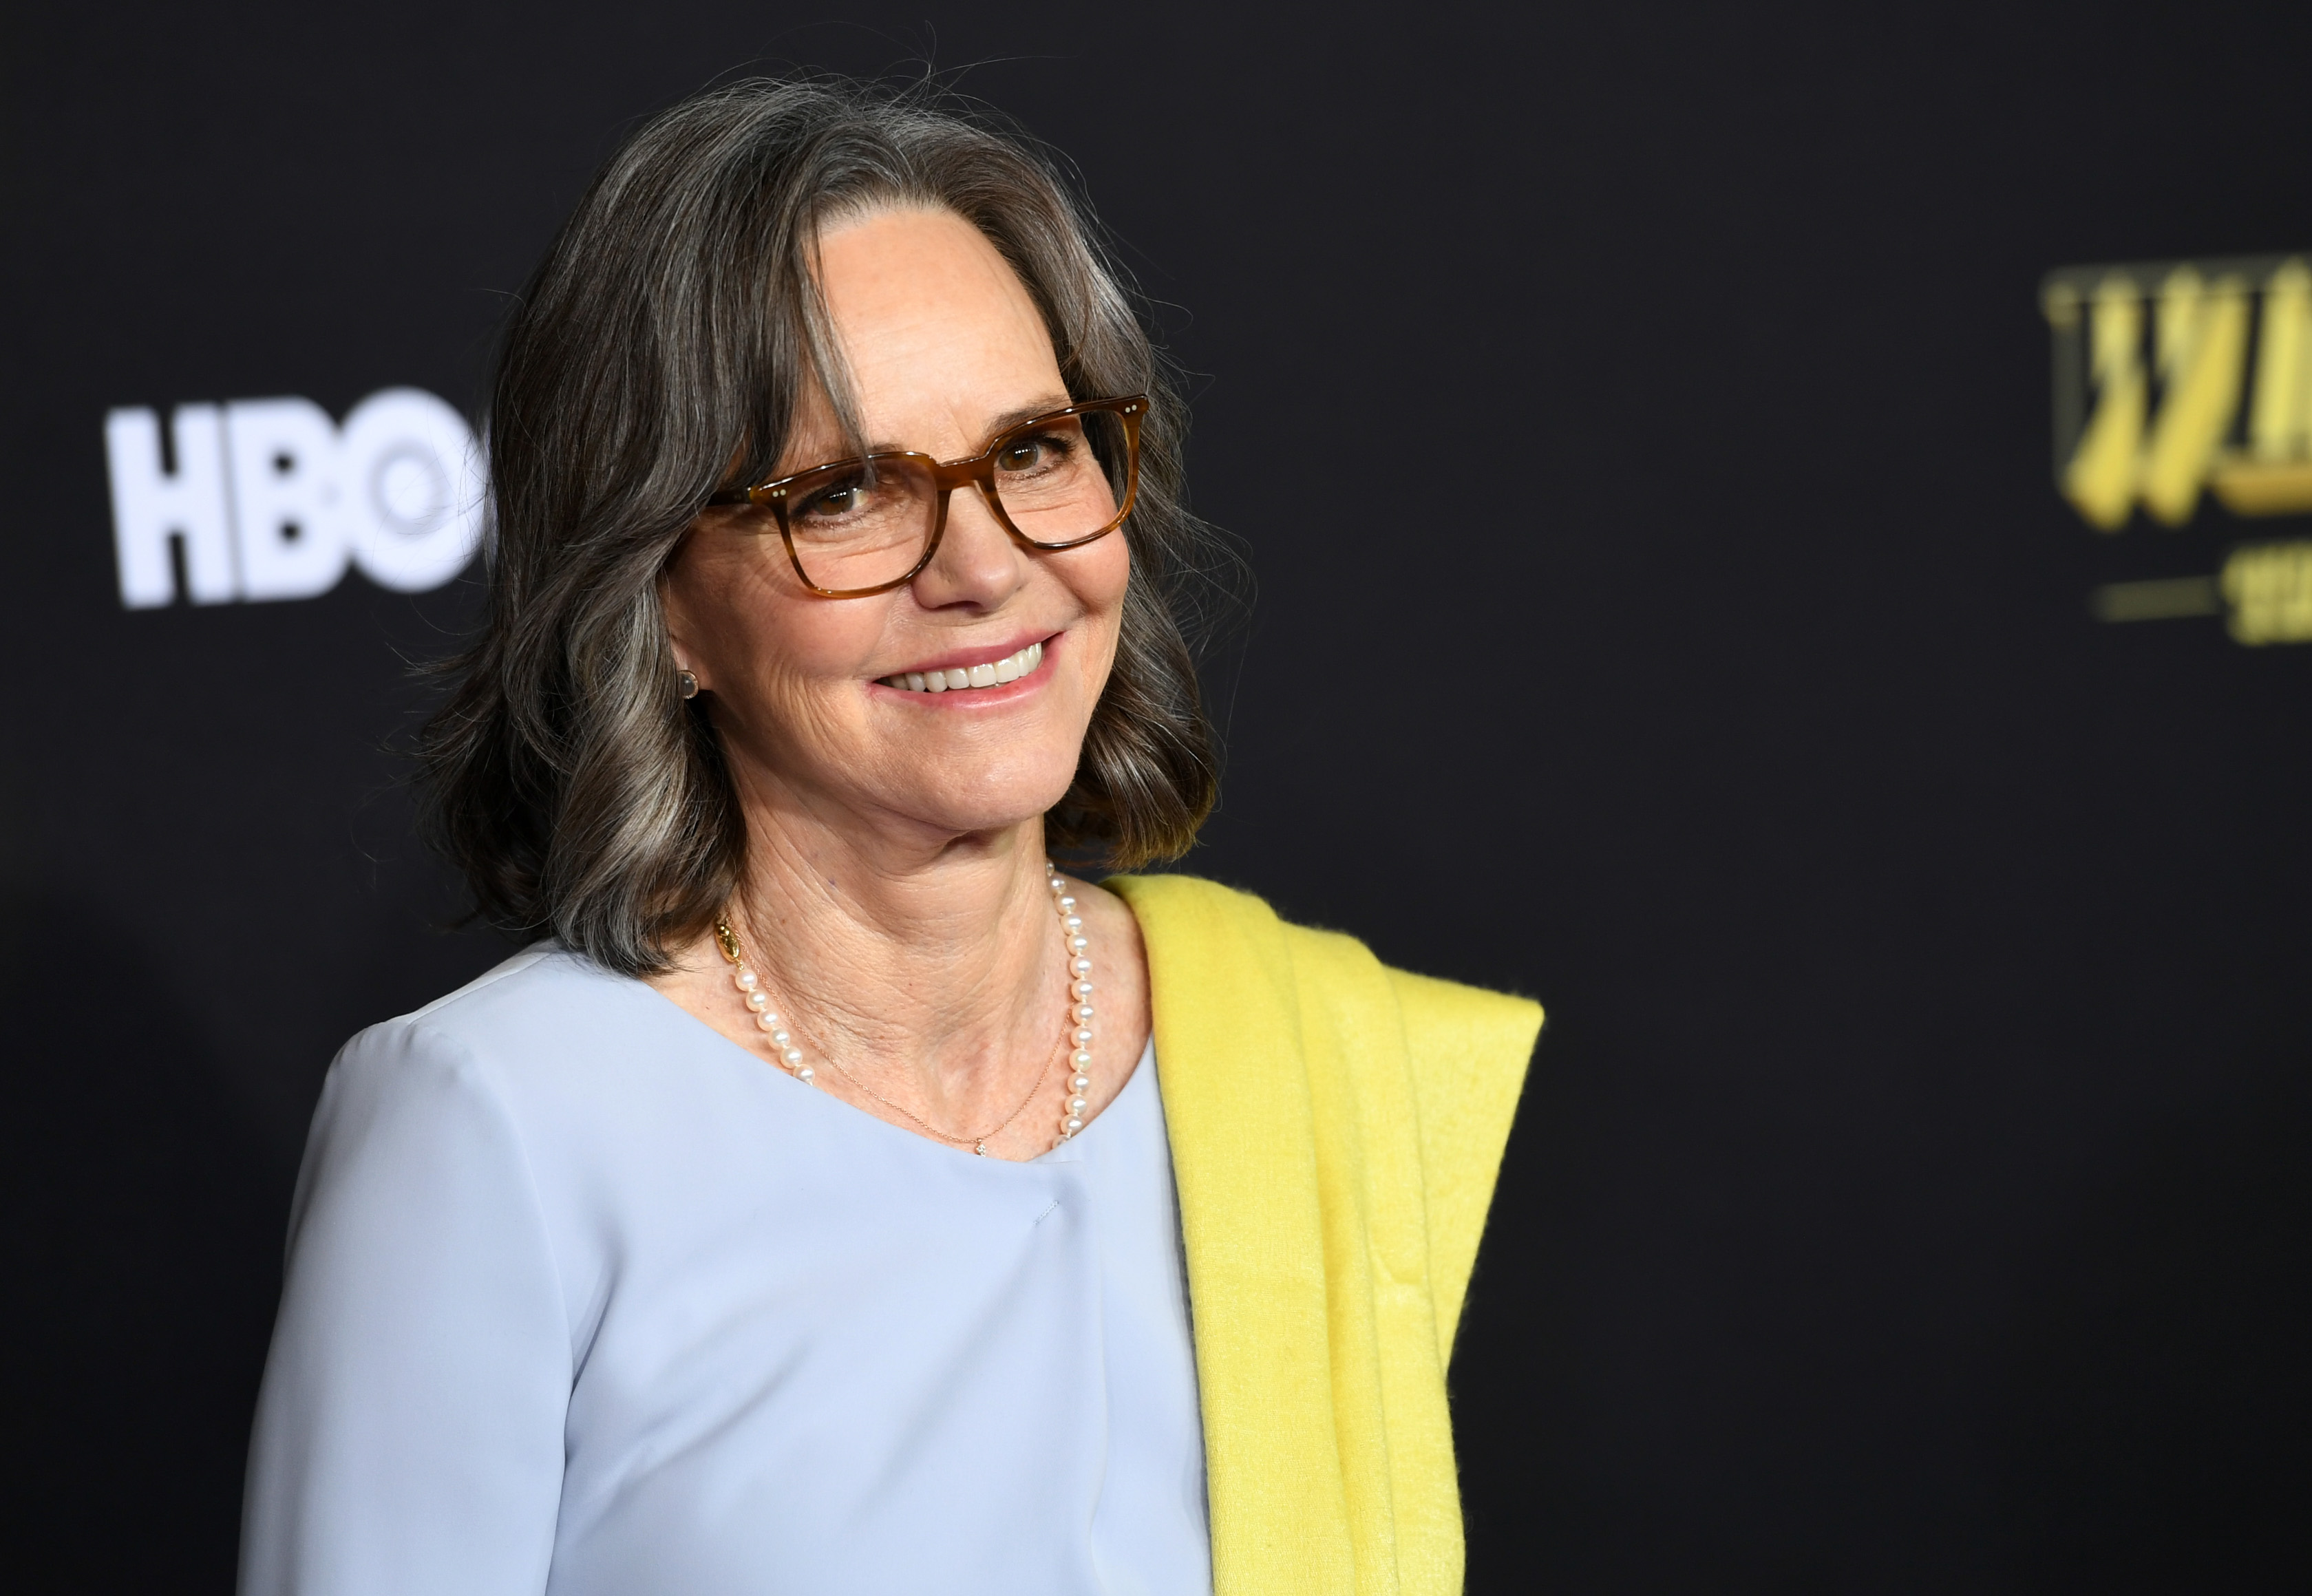 Sally Field attends the premiere of "Winning Time: The Rise Of The Lakers Dynasty" at The Theatre at Ace Hotel on March 2, 2022 in Los Angeles, California | Source: Getty Images